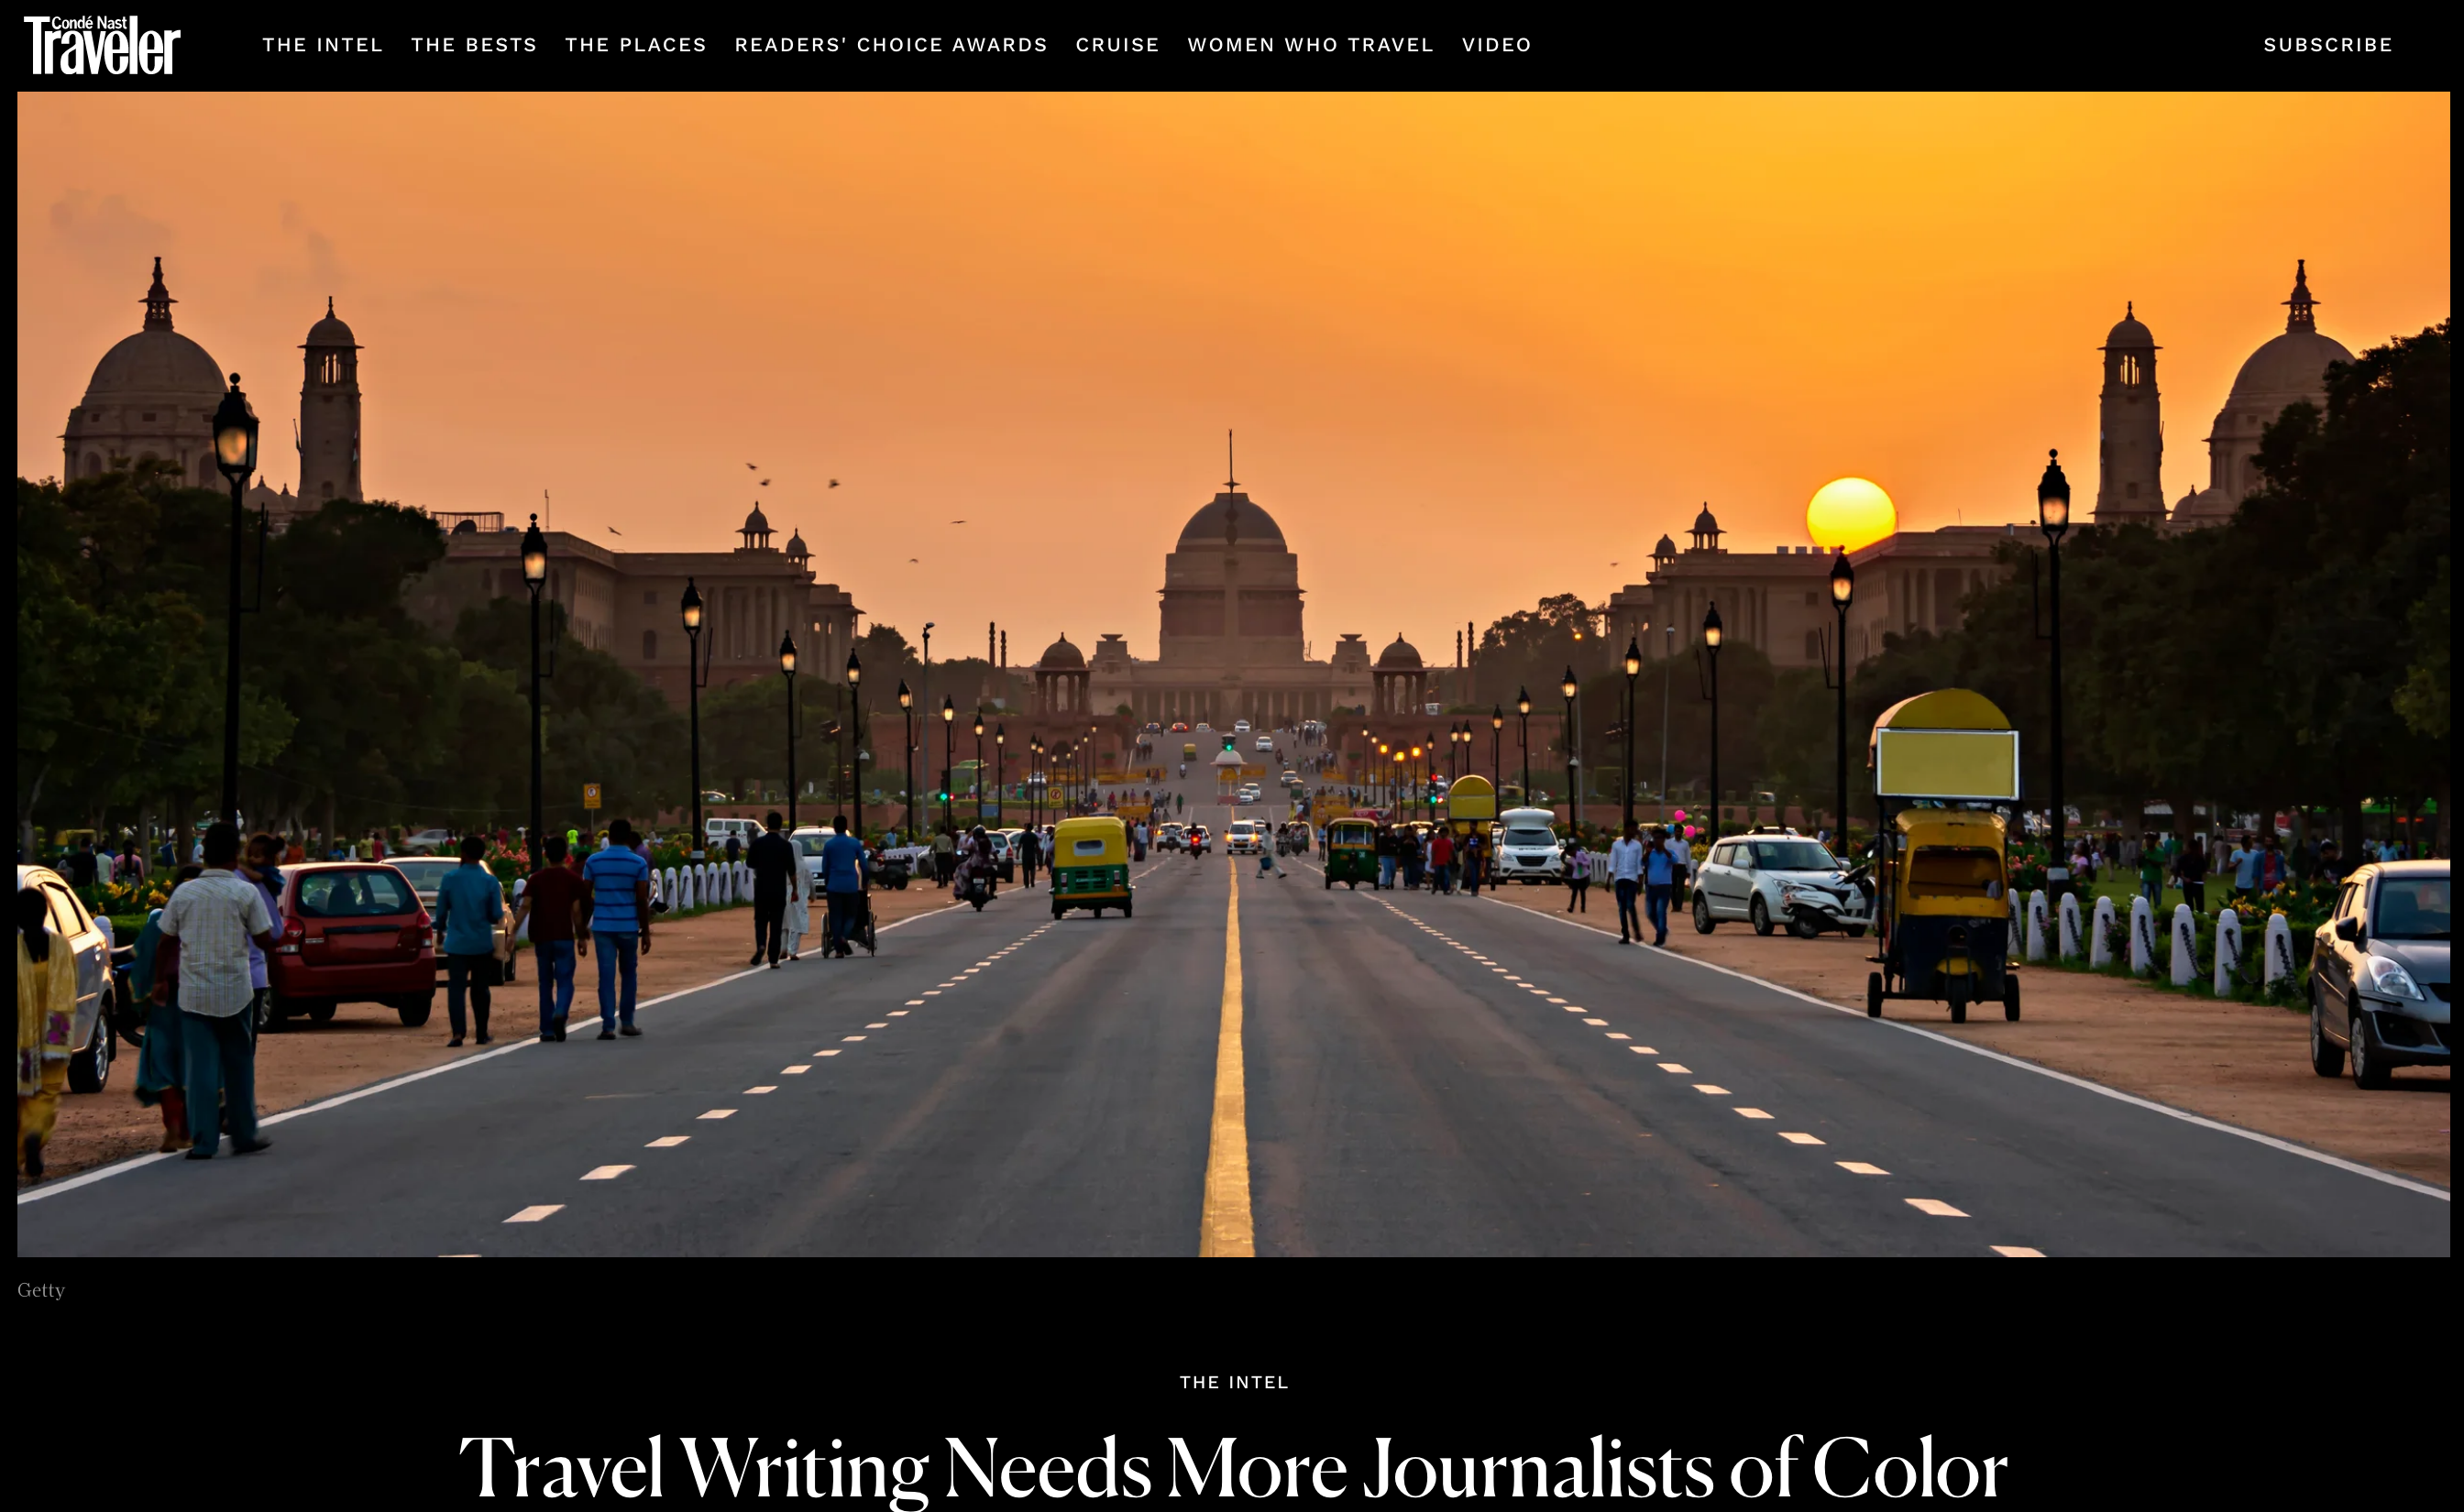 Condé Nast Traveler: Travel Writing Needs More Journalists of Color